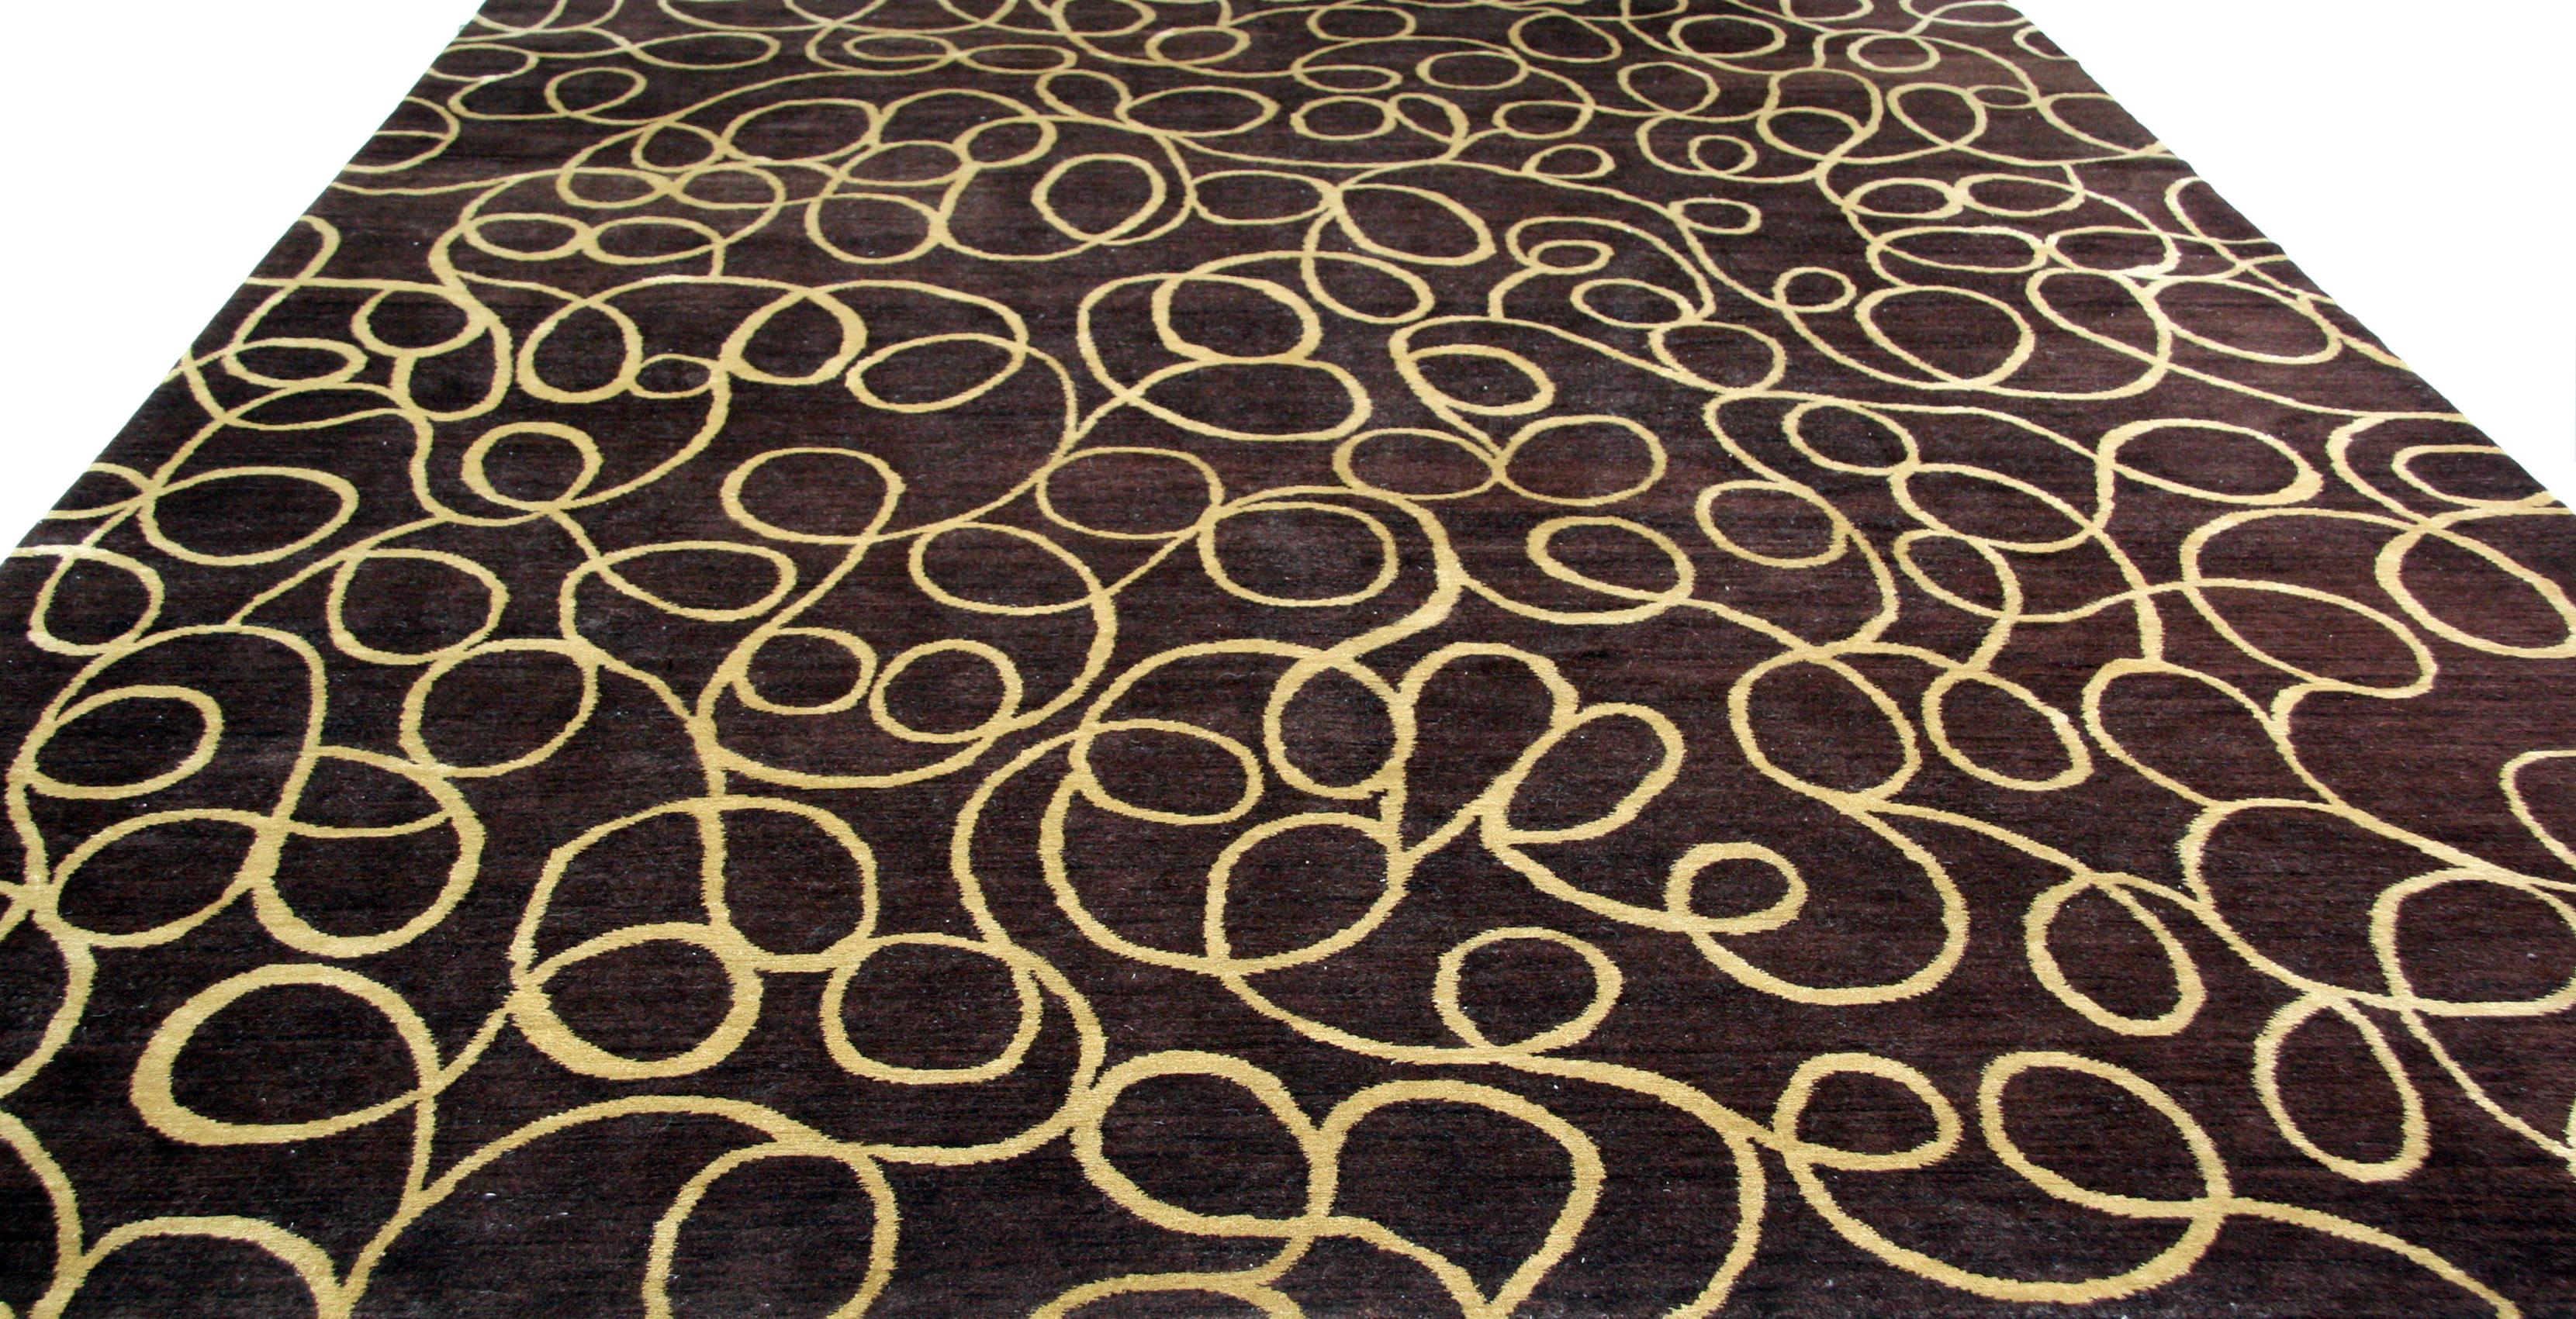 Add a dash of whimsy and warmth to a larger space with this rich chocolate brown wool and silk area rug with cream/gold swirls. The wool silk blend brings durability, a sensuous texture and comfort underfoot. Suitable for home or office. 

Hand